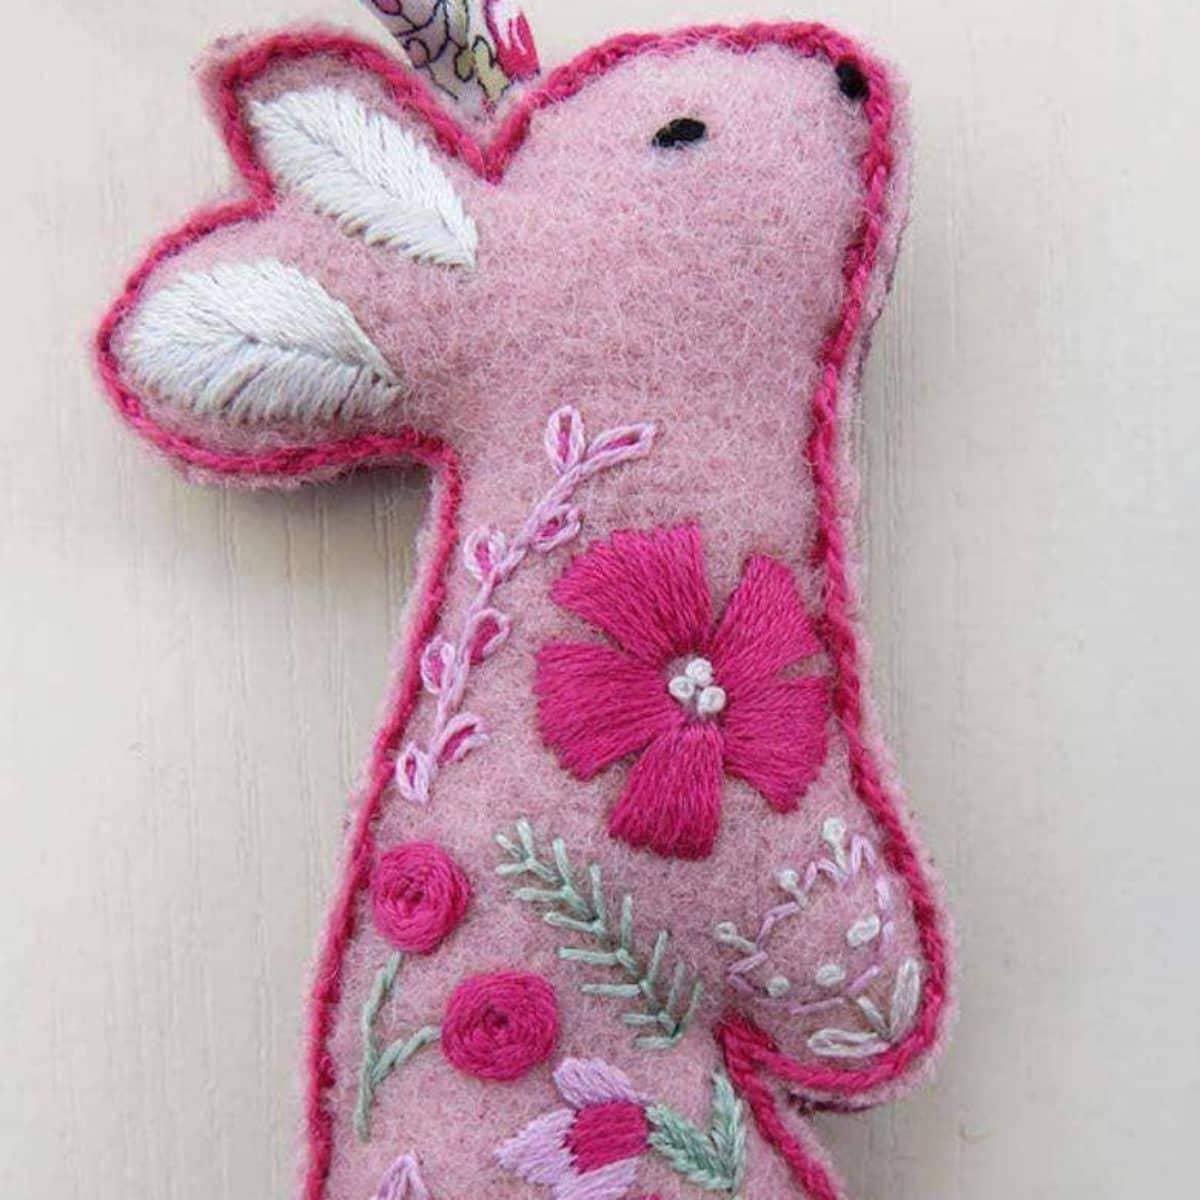 Floral Rabbit Decorations , PDF Download , StitchDoodles , embroidery hoop kit, embroidery kits for adults, embroidery kits for beginners, embroidery rabbits, hand embroidery, modern embroidery kits, PDF pattern, unique embroidery kits , StitchDoodles , shop.stitchdoodles.com